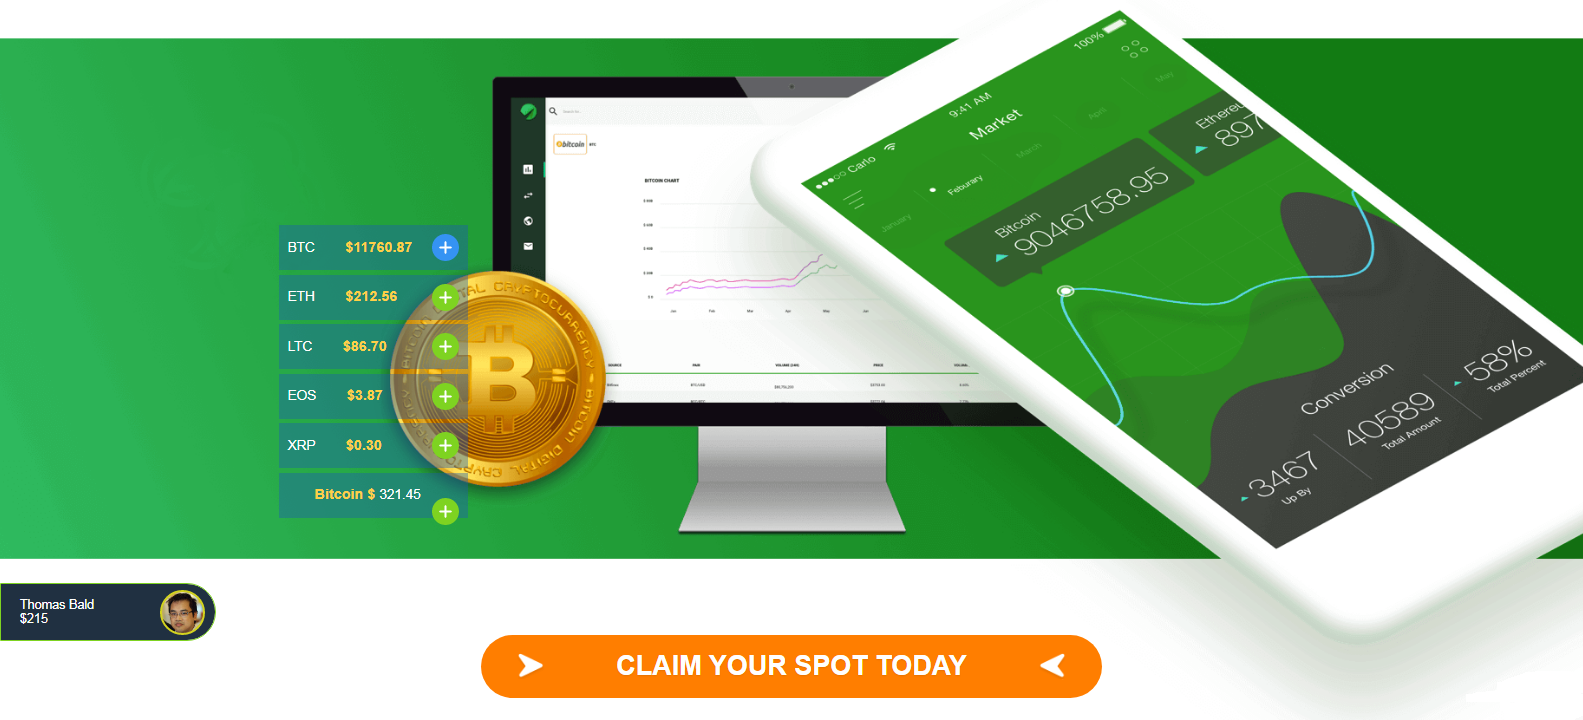 Immediate Bitcoin Reviews - Is it Legit, or a Scam? | Signup Now!